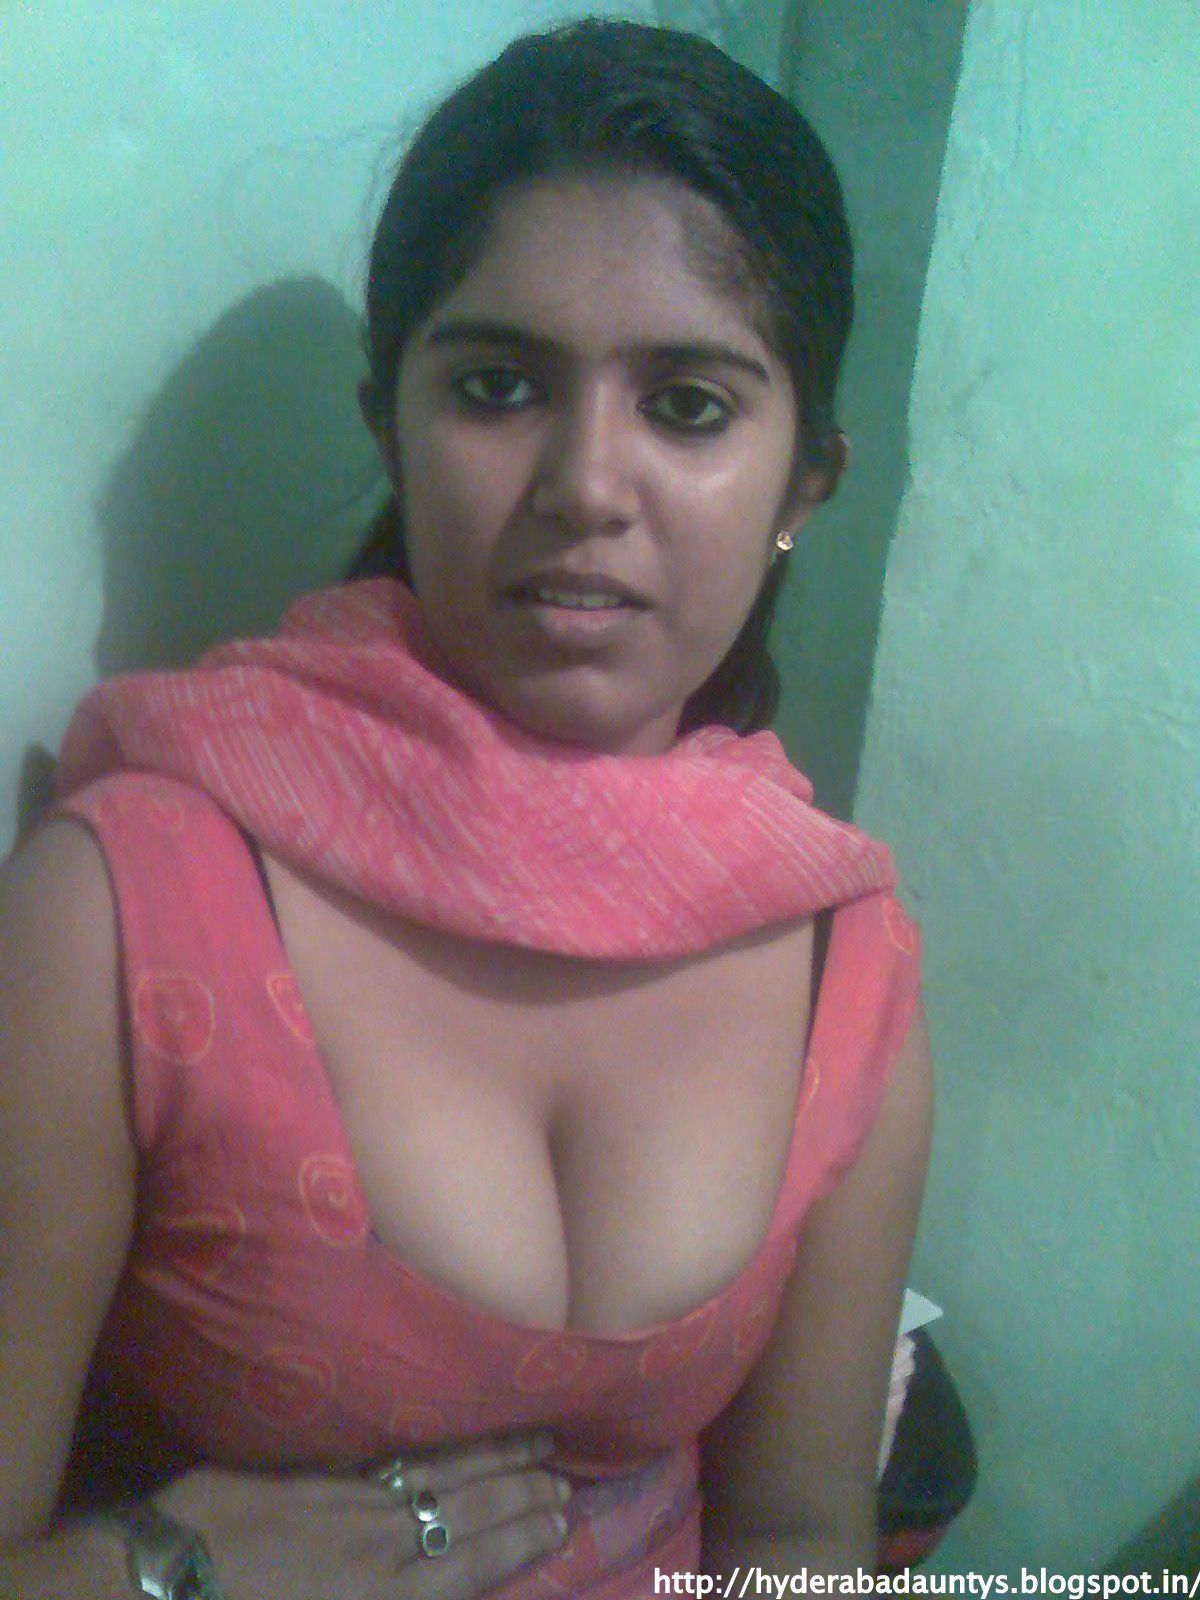 Indian nude college girls boobs videos - Nude gallery